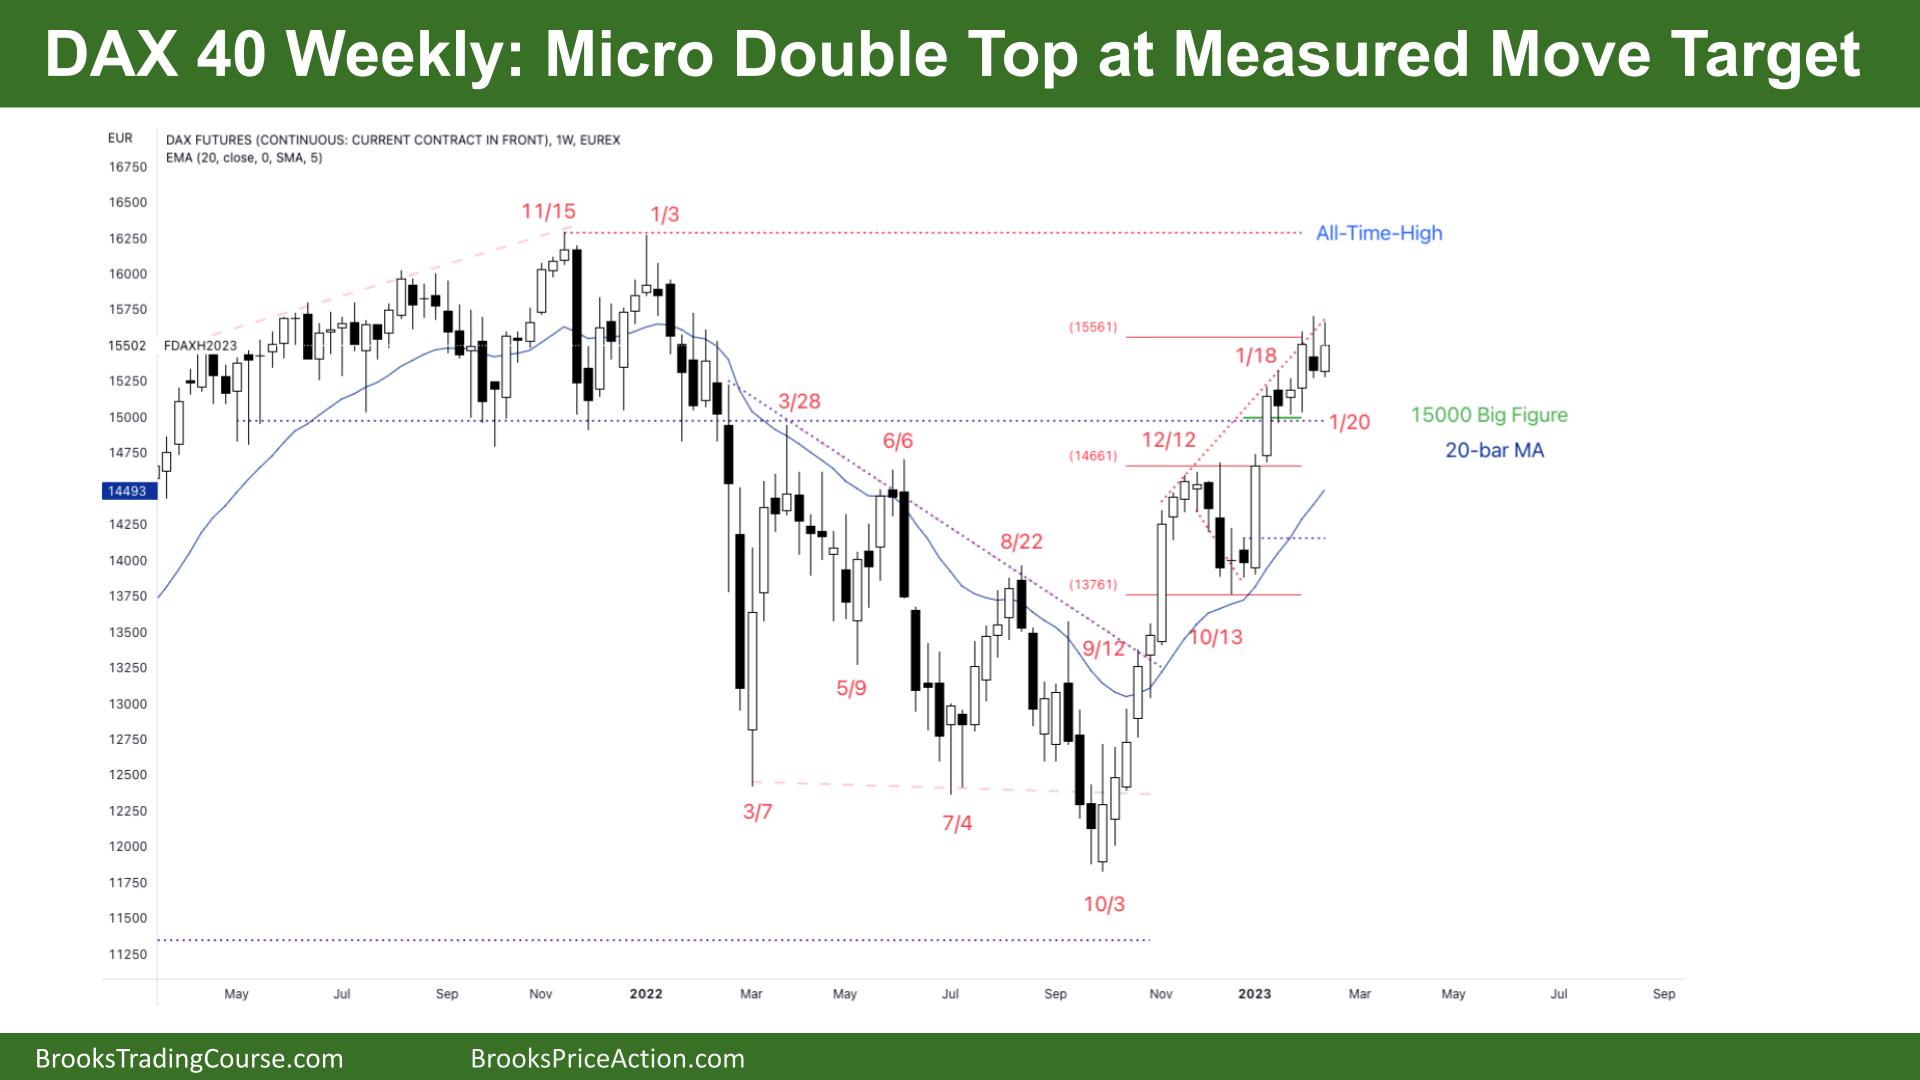 DAX 40 Micro Double Top at Measured Move Target